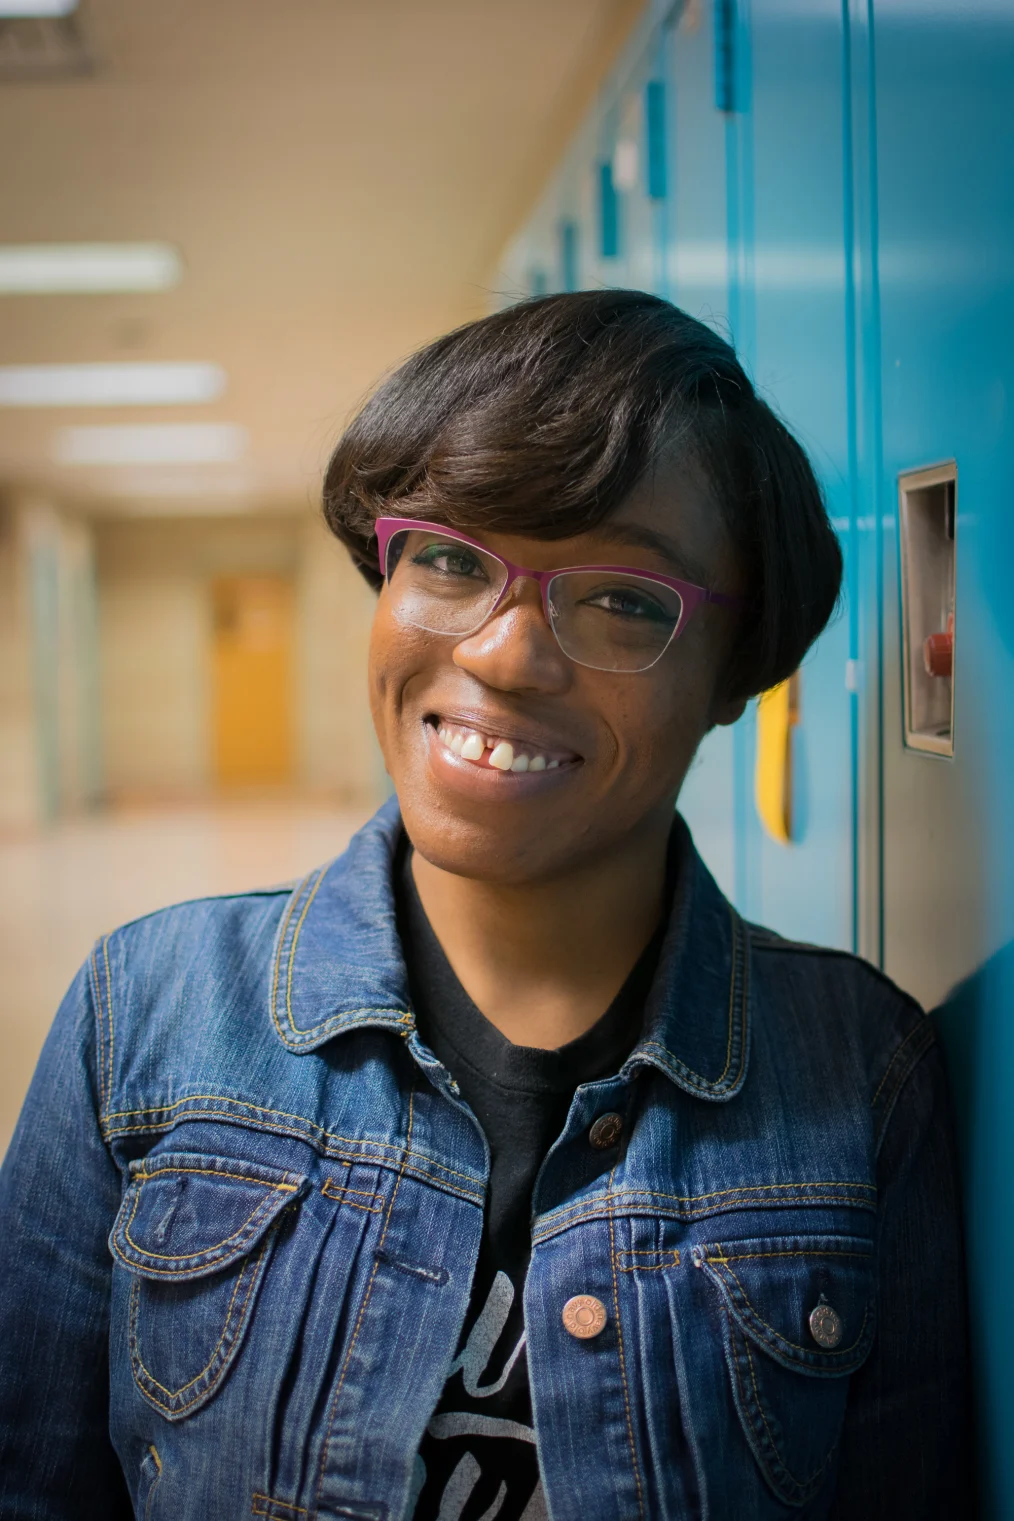 A deep skin toned Black woman with ear length dark hair is smiling with her teeth showing. She is wearing pink framed glasses, a black T-shirt and a denim jacket. She is leaning to the right against a set of blue lockers in a school hallway.